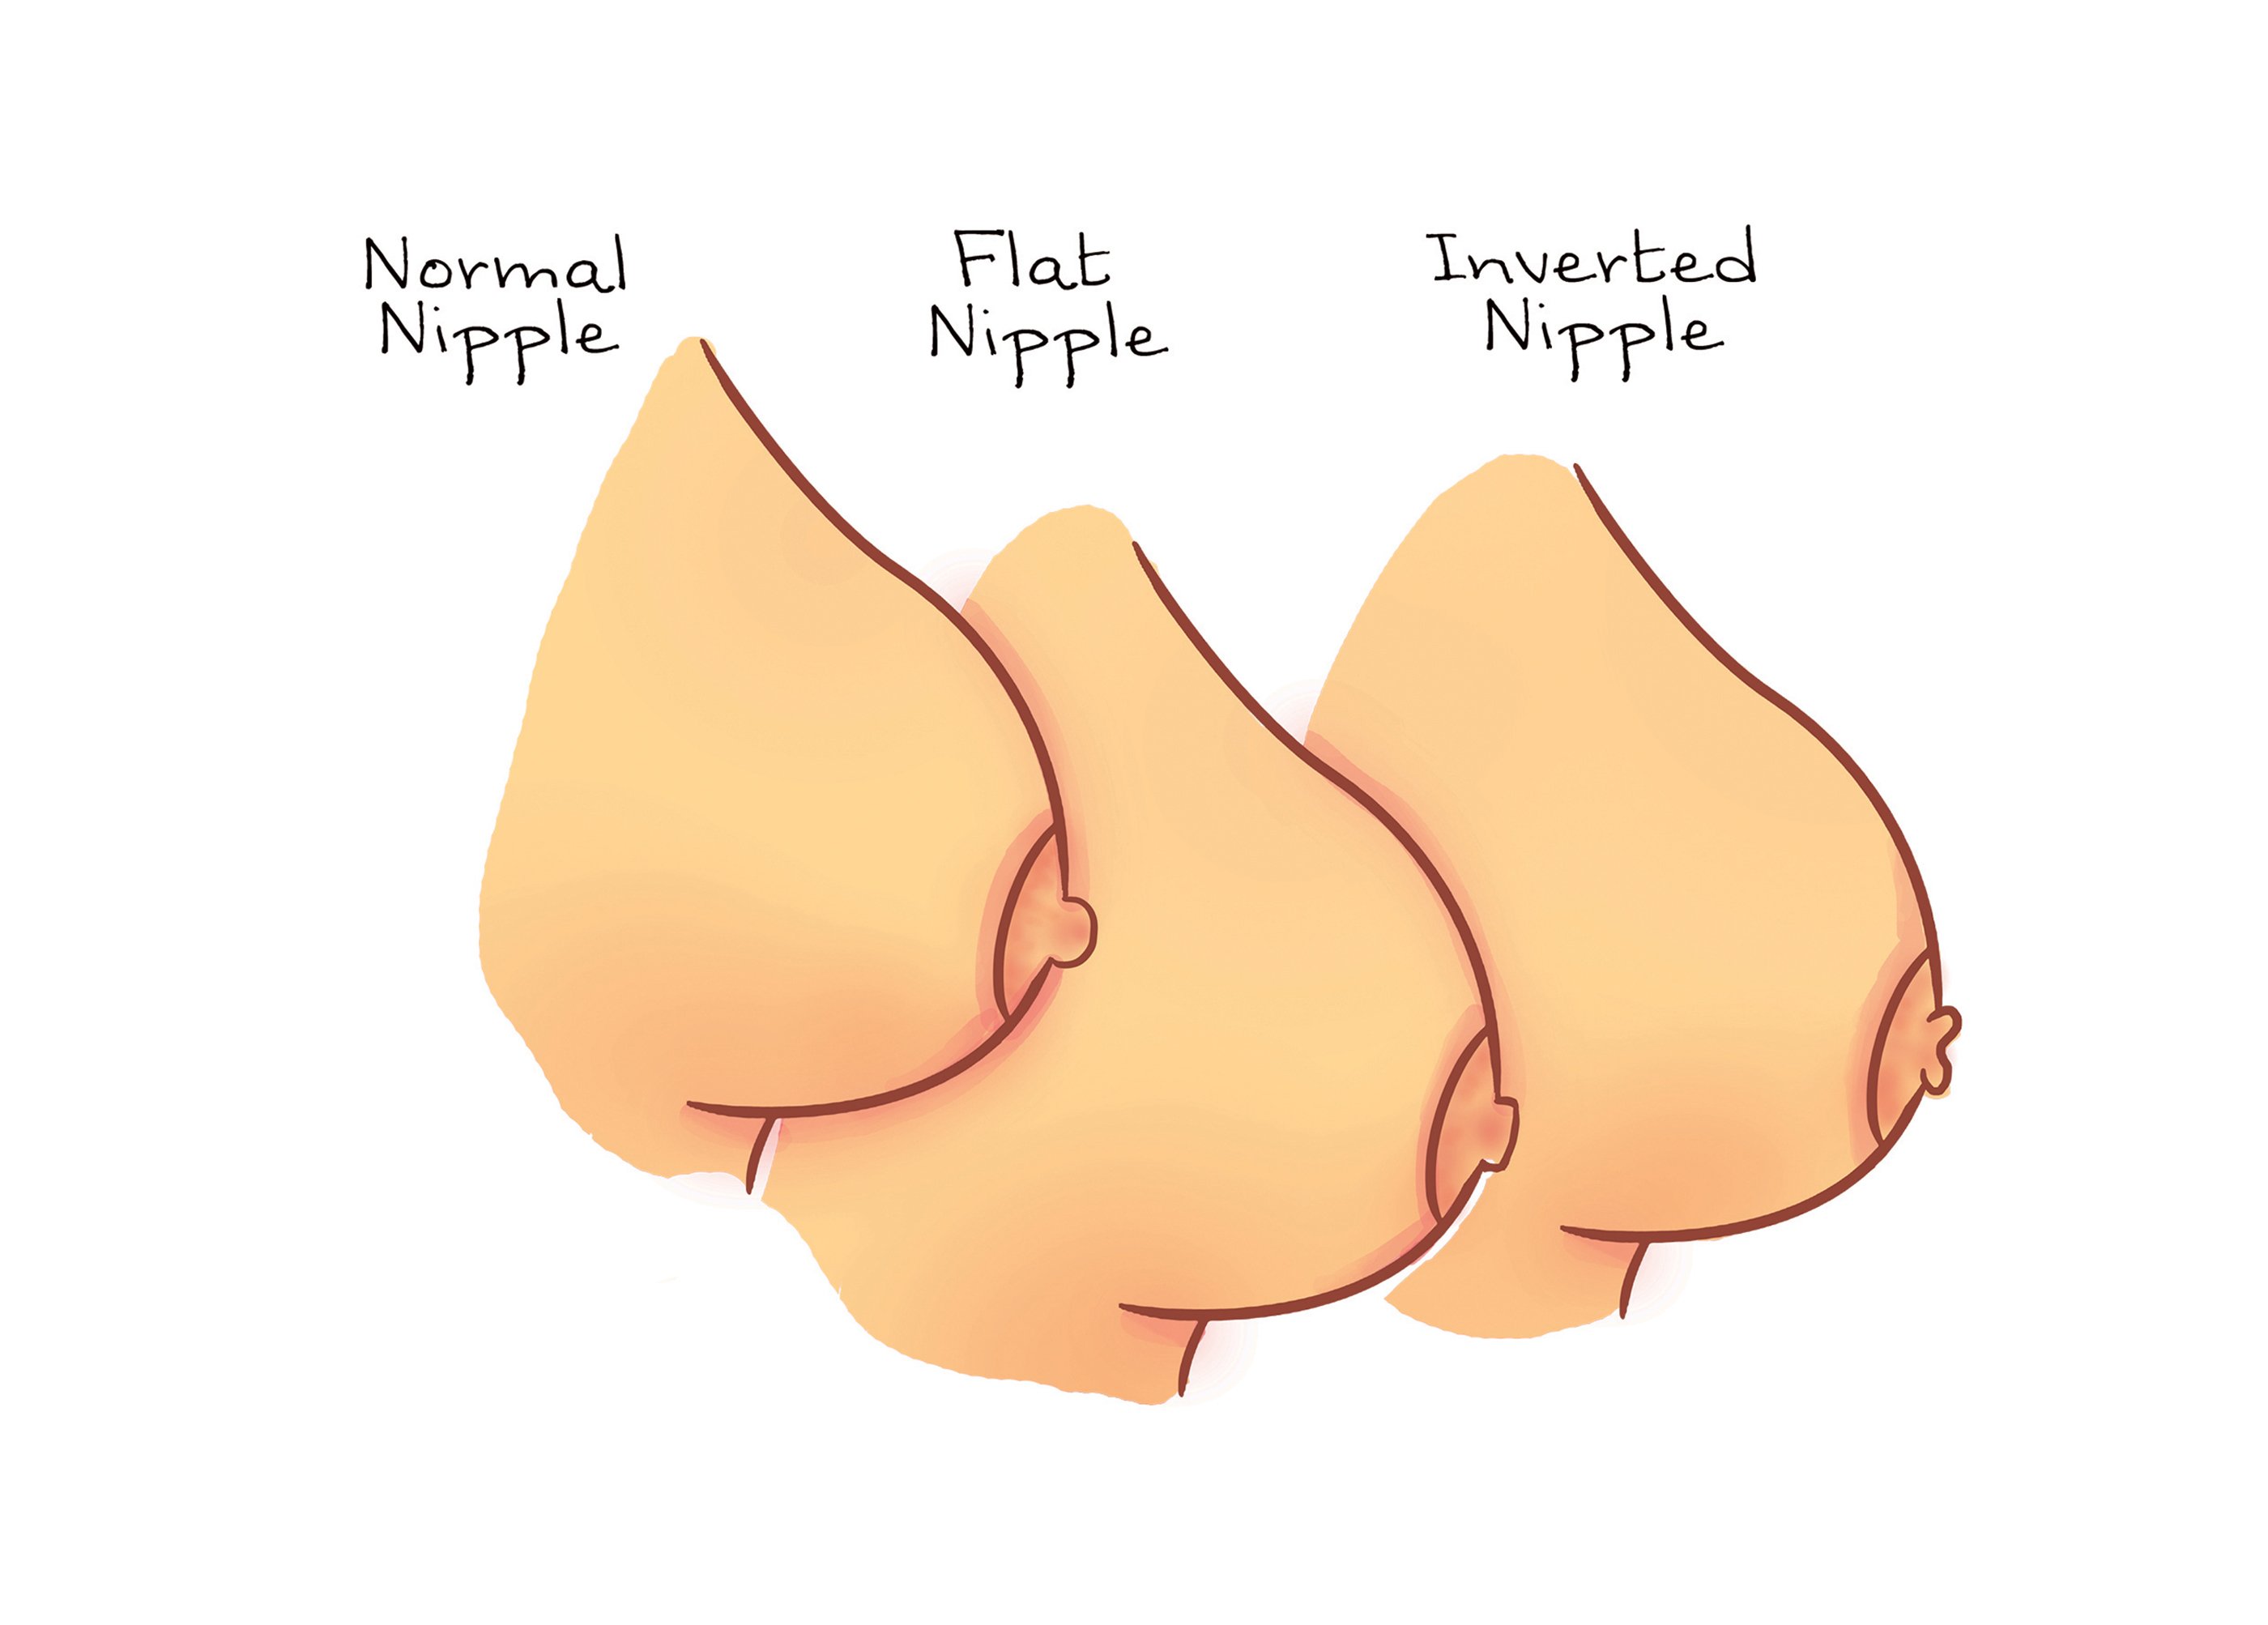 Nipple Changes To be Checked Out - WomenWorking